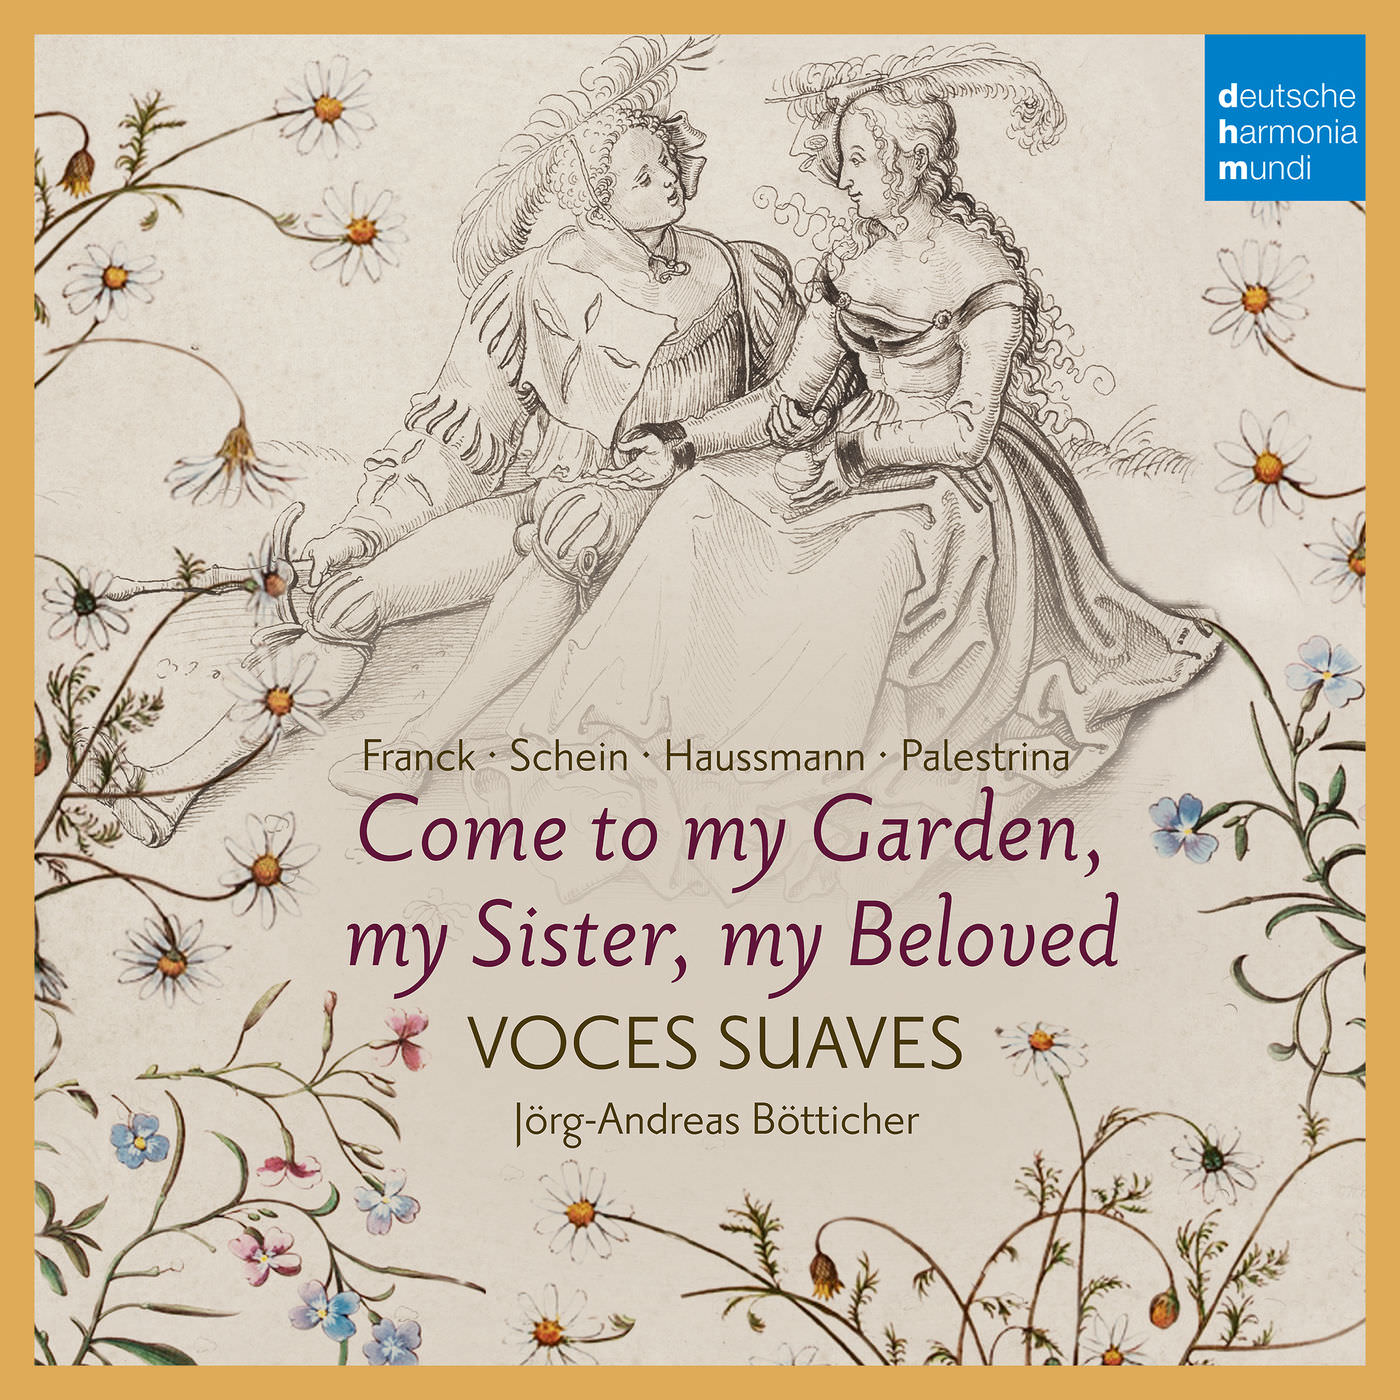 Voces Suaves - Come to My Garden - German Early Baroque Lovesongs (2018) [FLAC 24bit/96kHz]